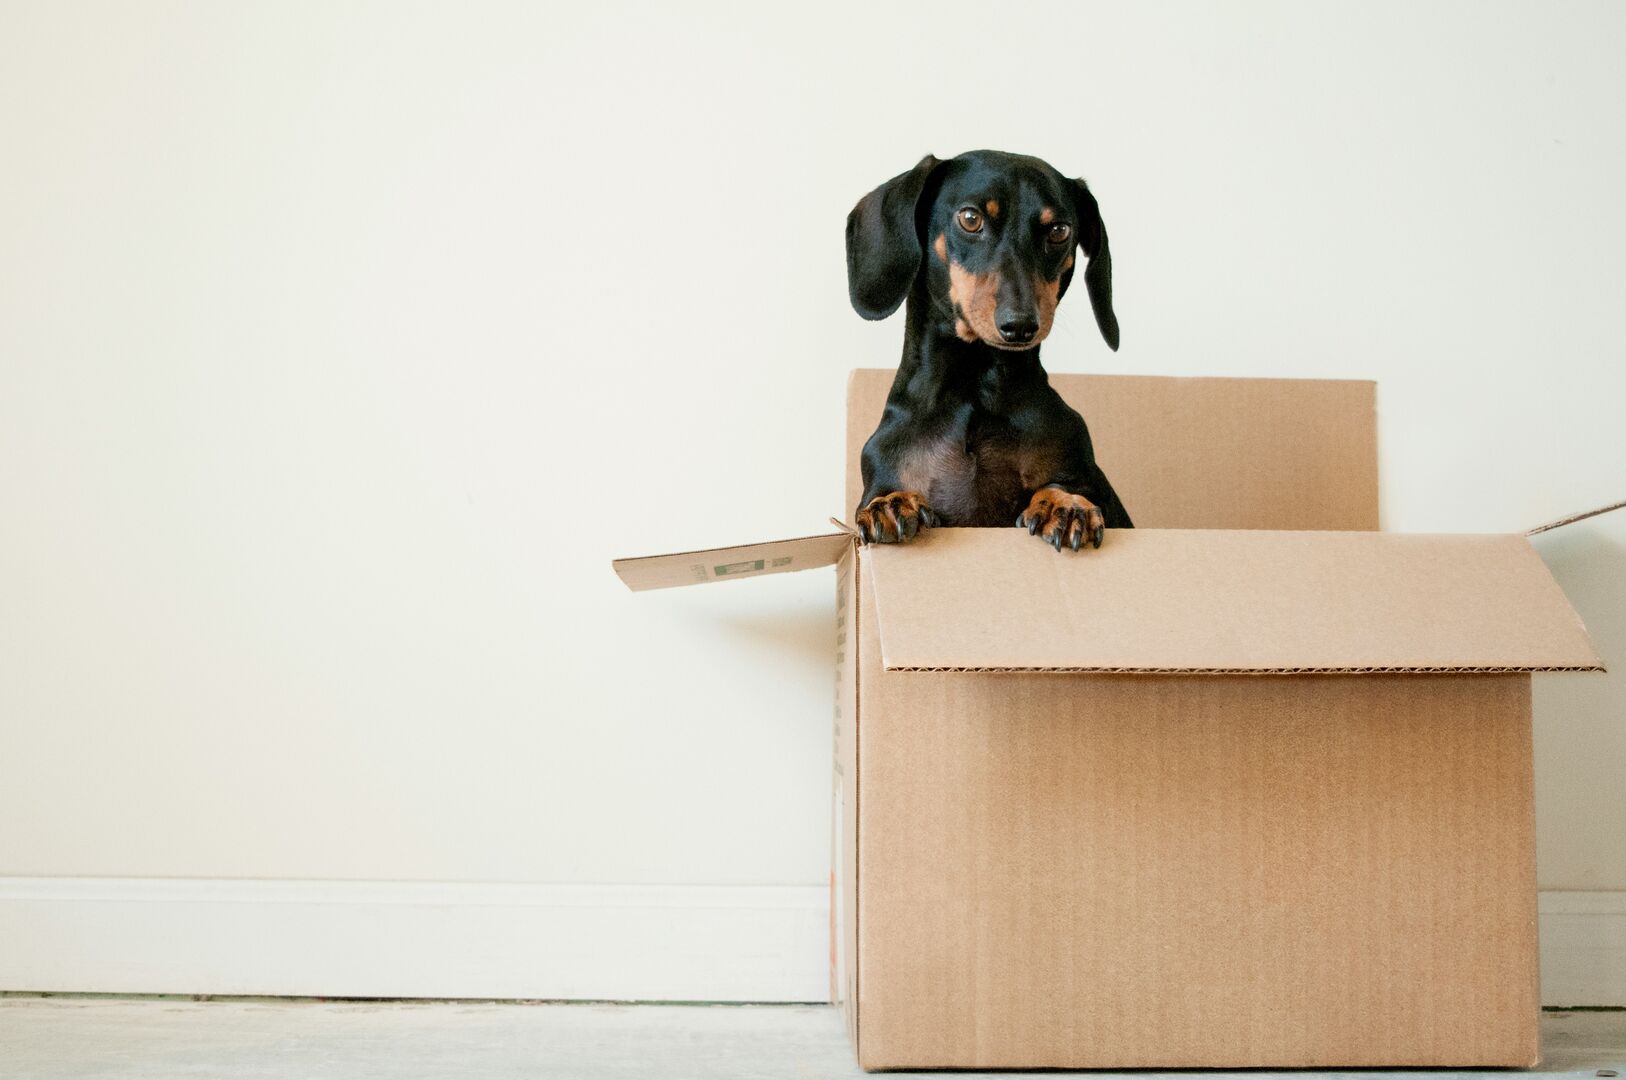 Dachshund in a moving box, dog popping out of a box